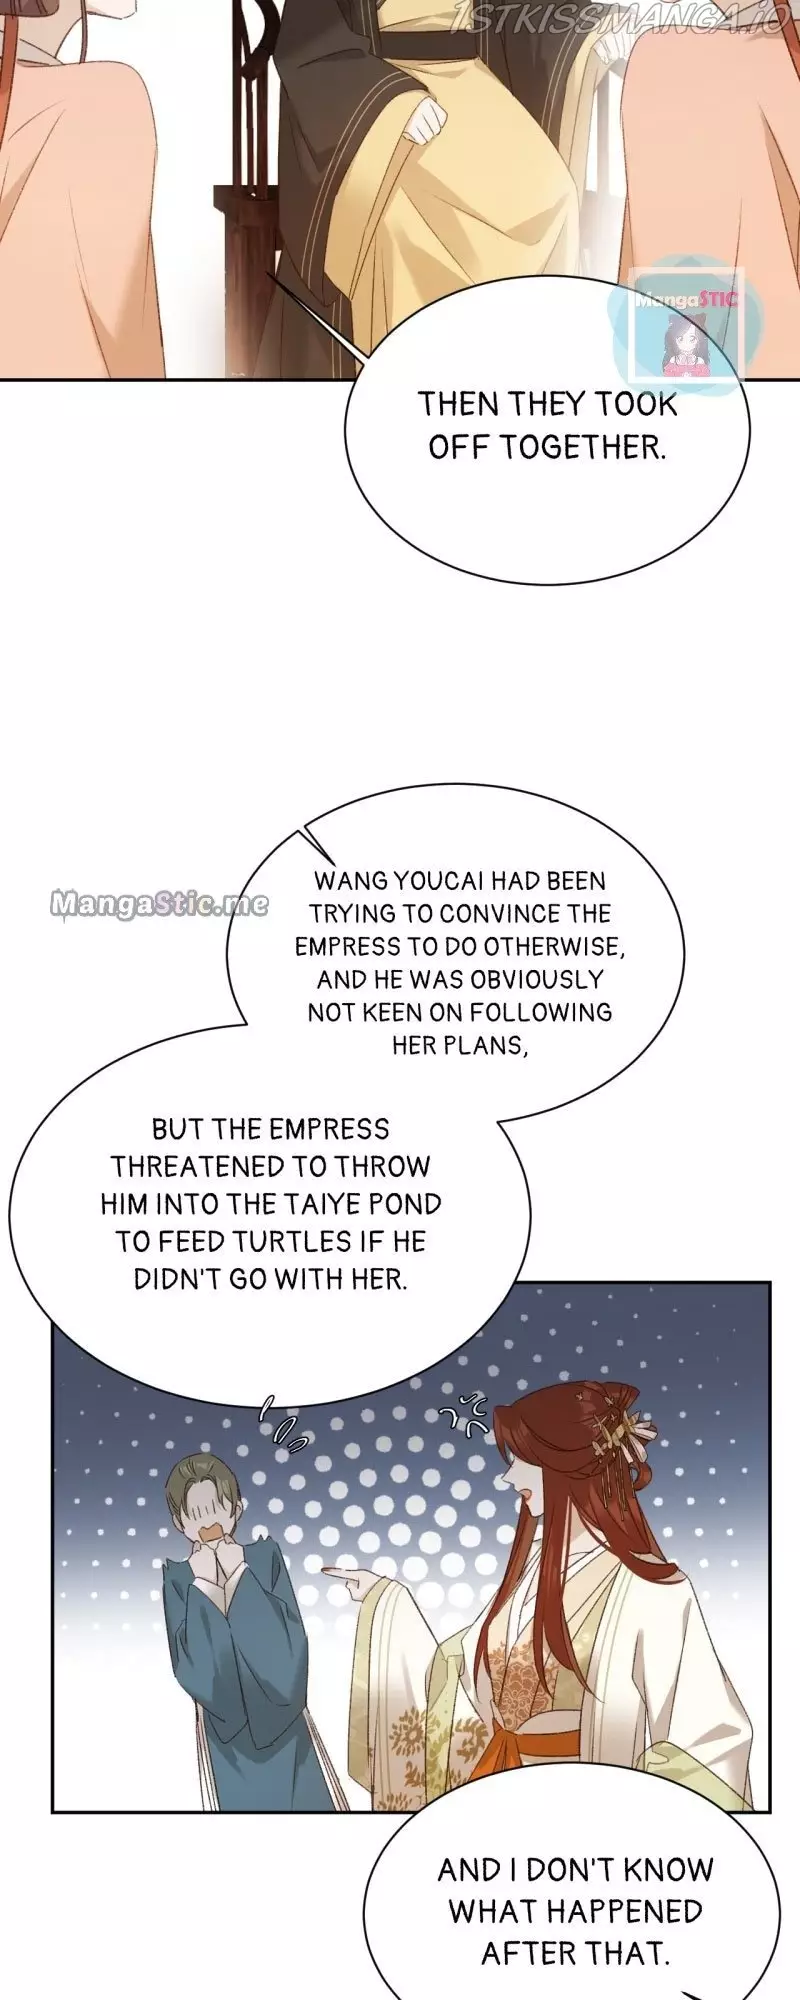 The Empress With No Virtue - 64 page 4-4cfb9103